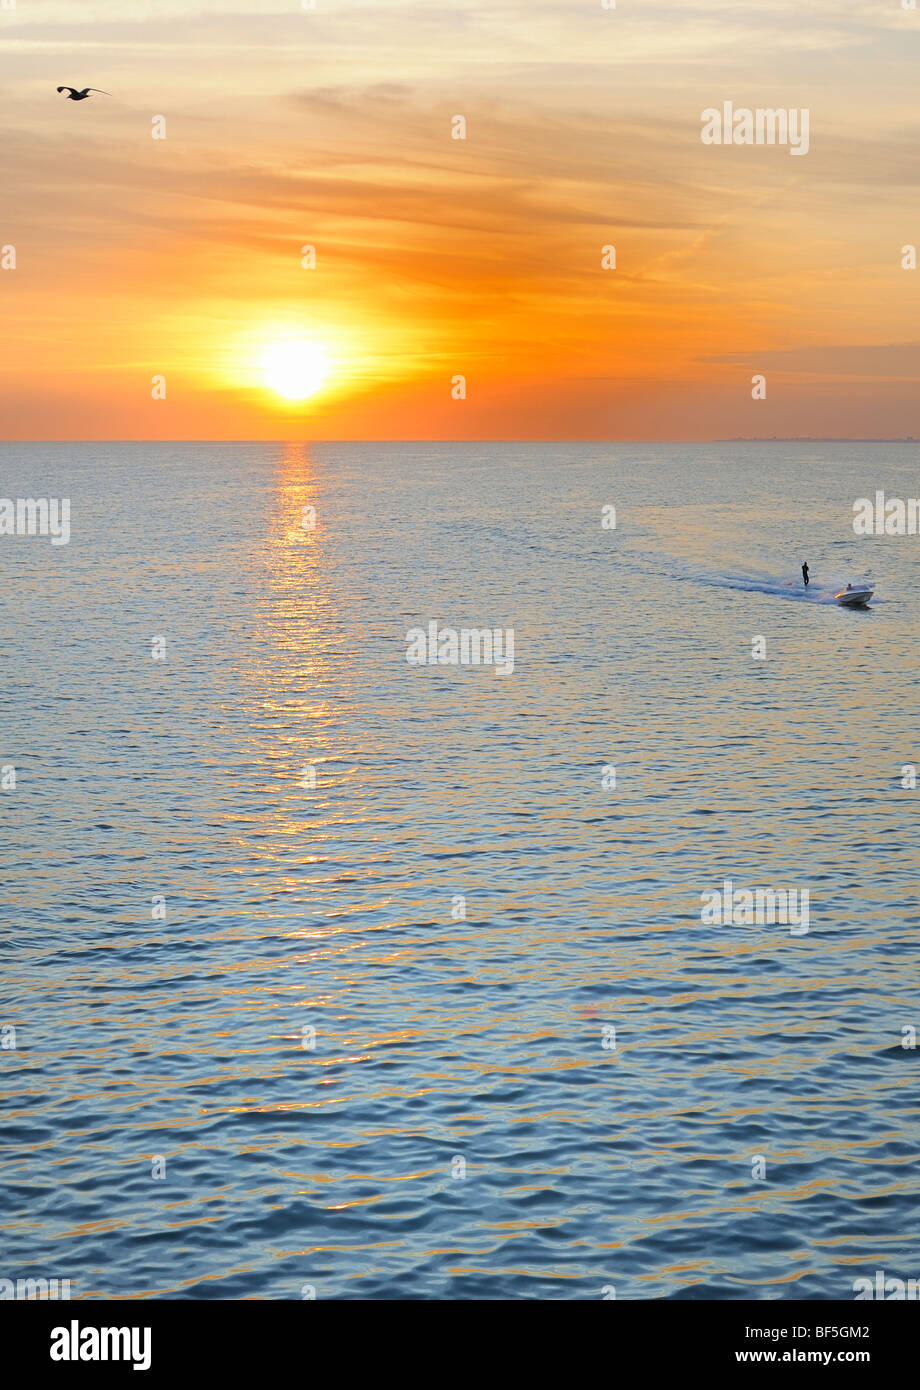 Waterskier at sunset Stock Photo